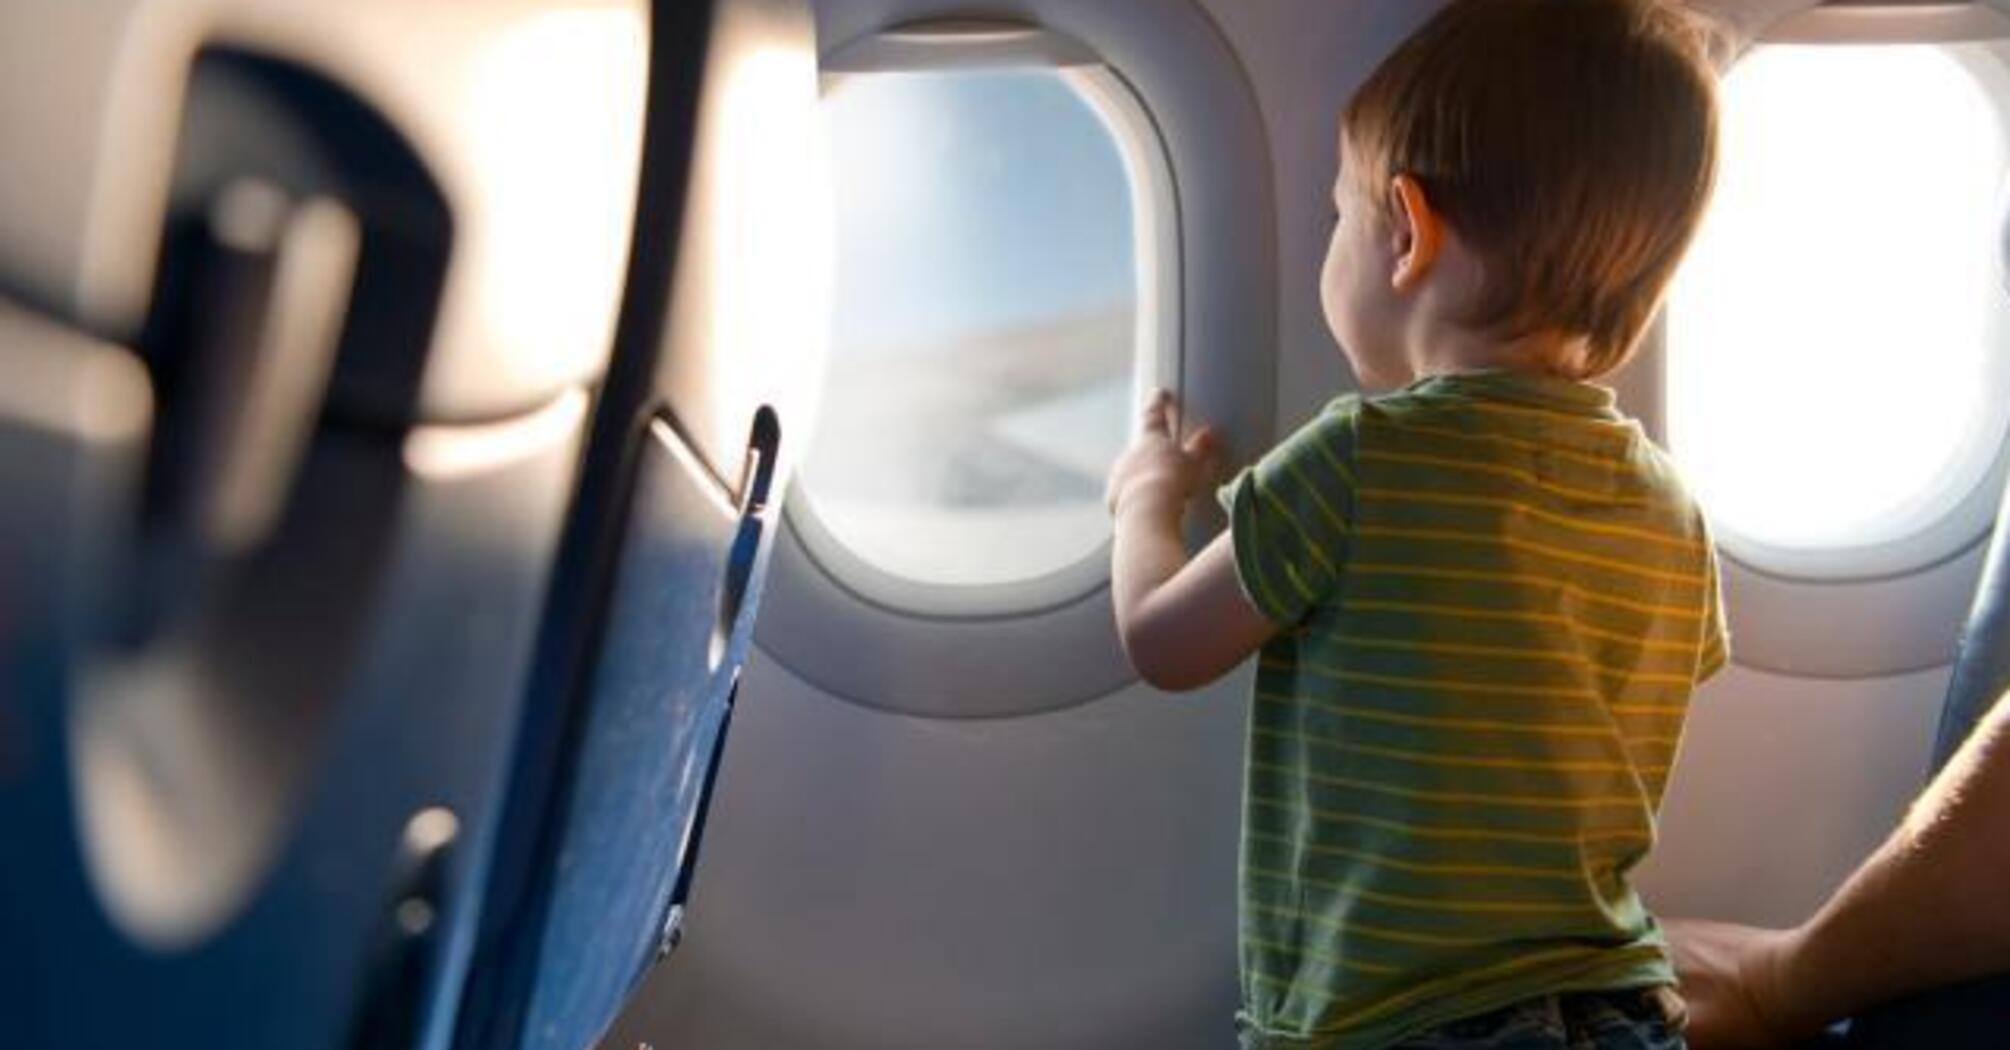 Nurse praised for how she handled someone’s unruly child on flight